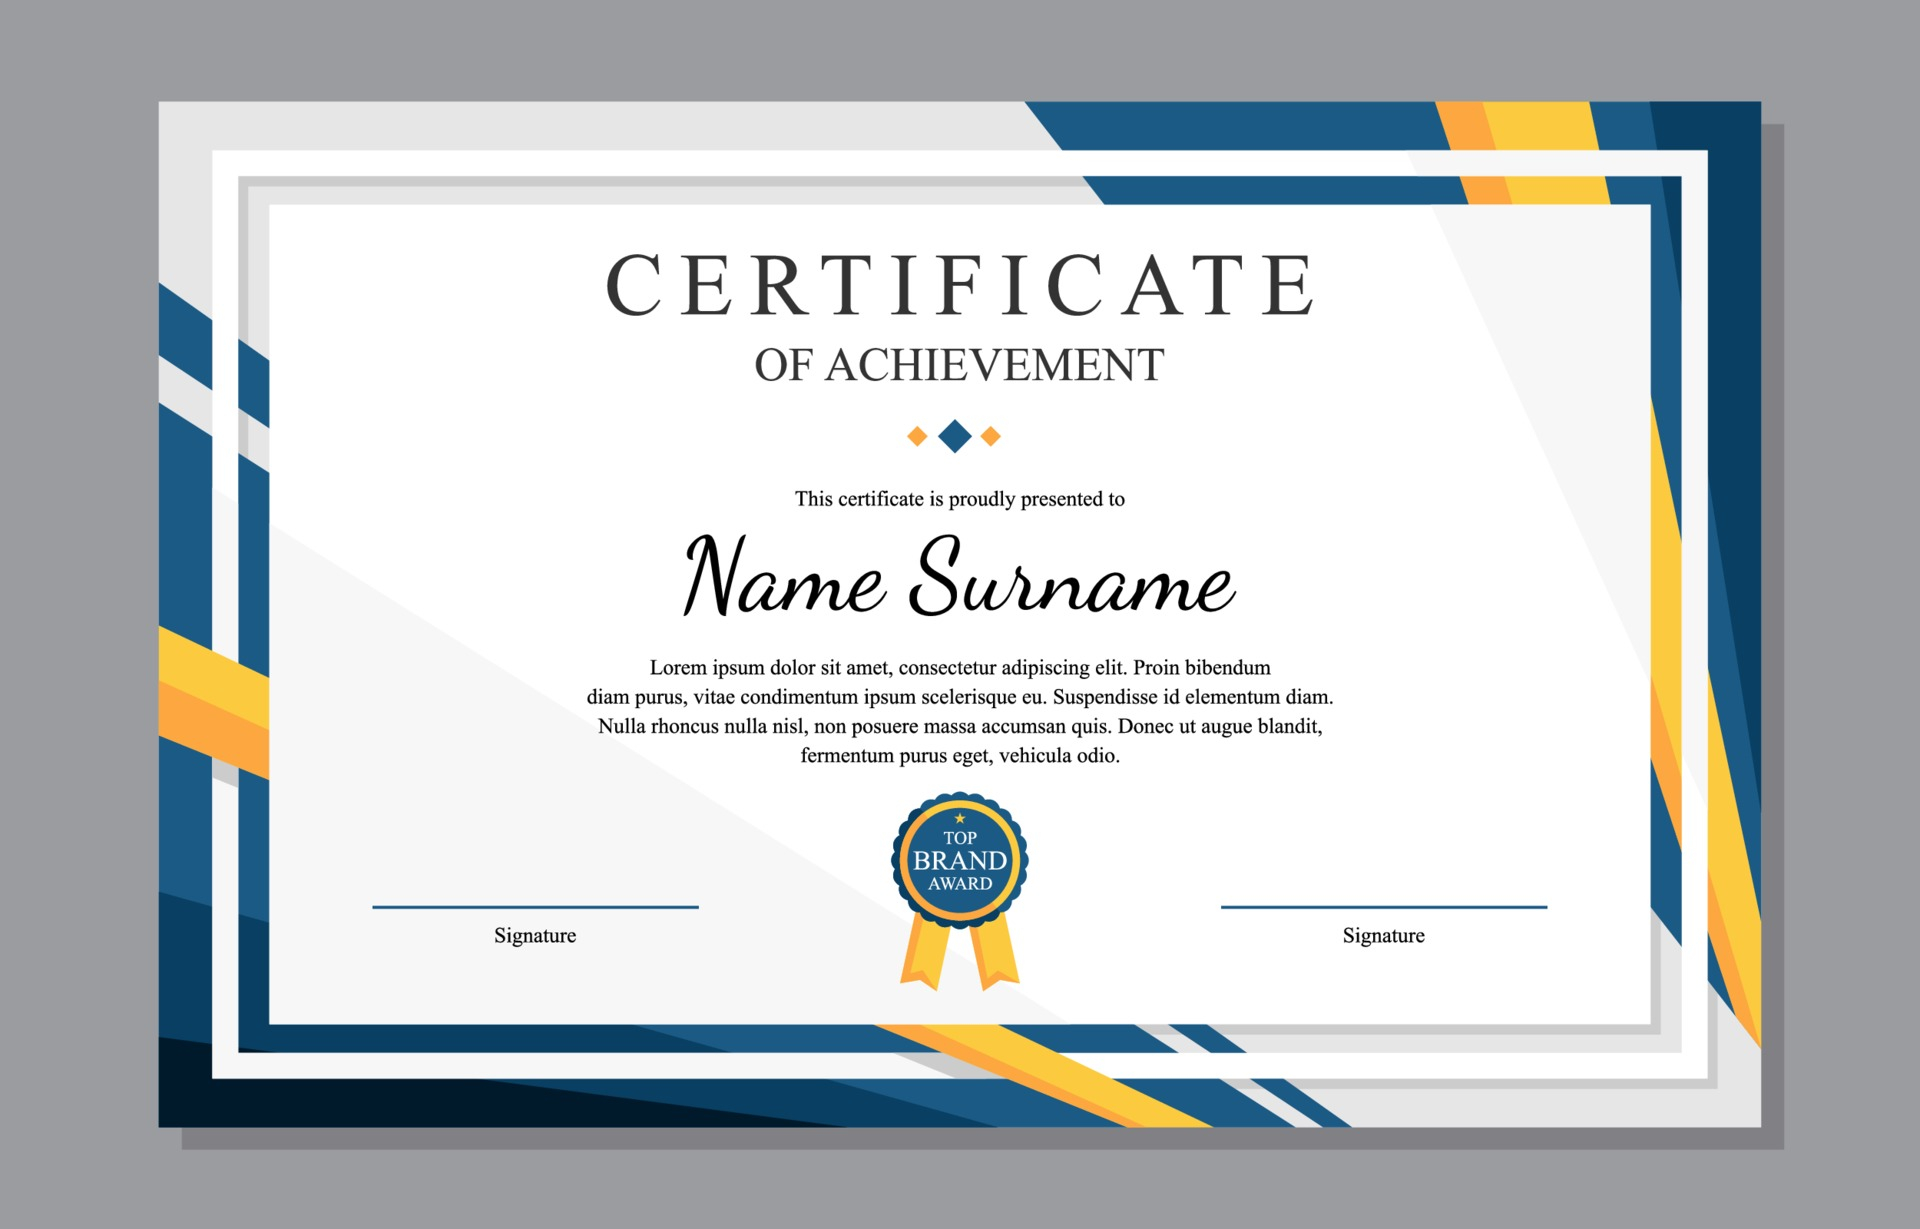 Certificate Templates, Free Certificate Designs For Free Printable Blank Award Certificate Templates